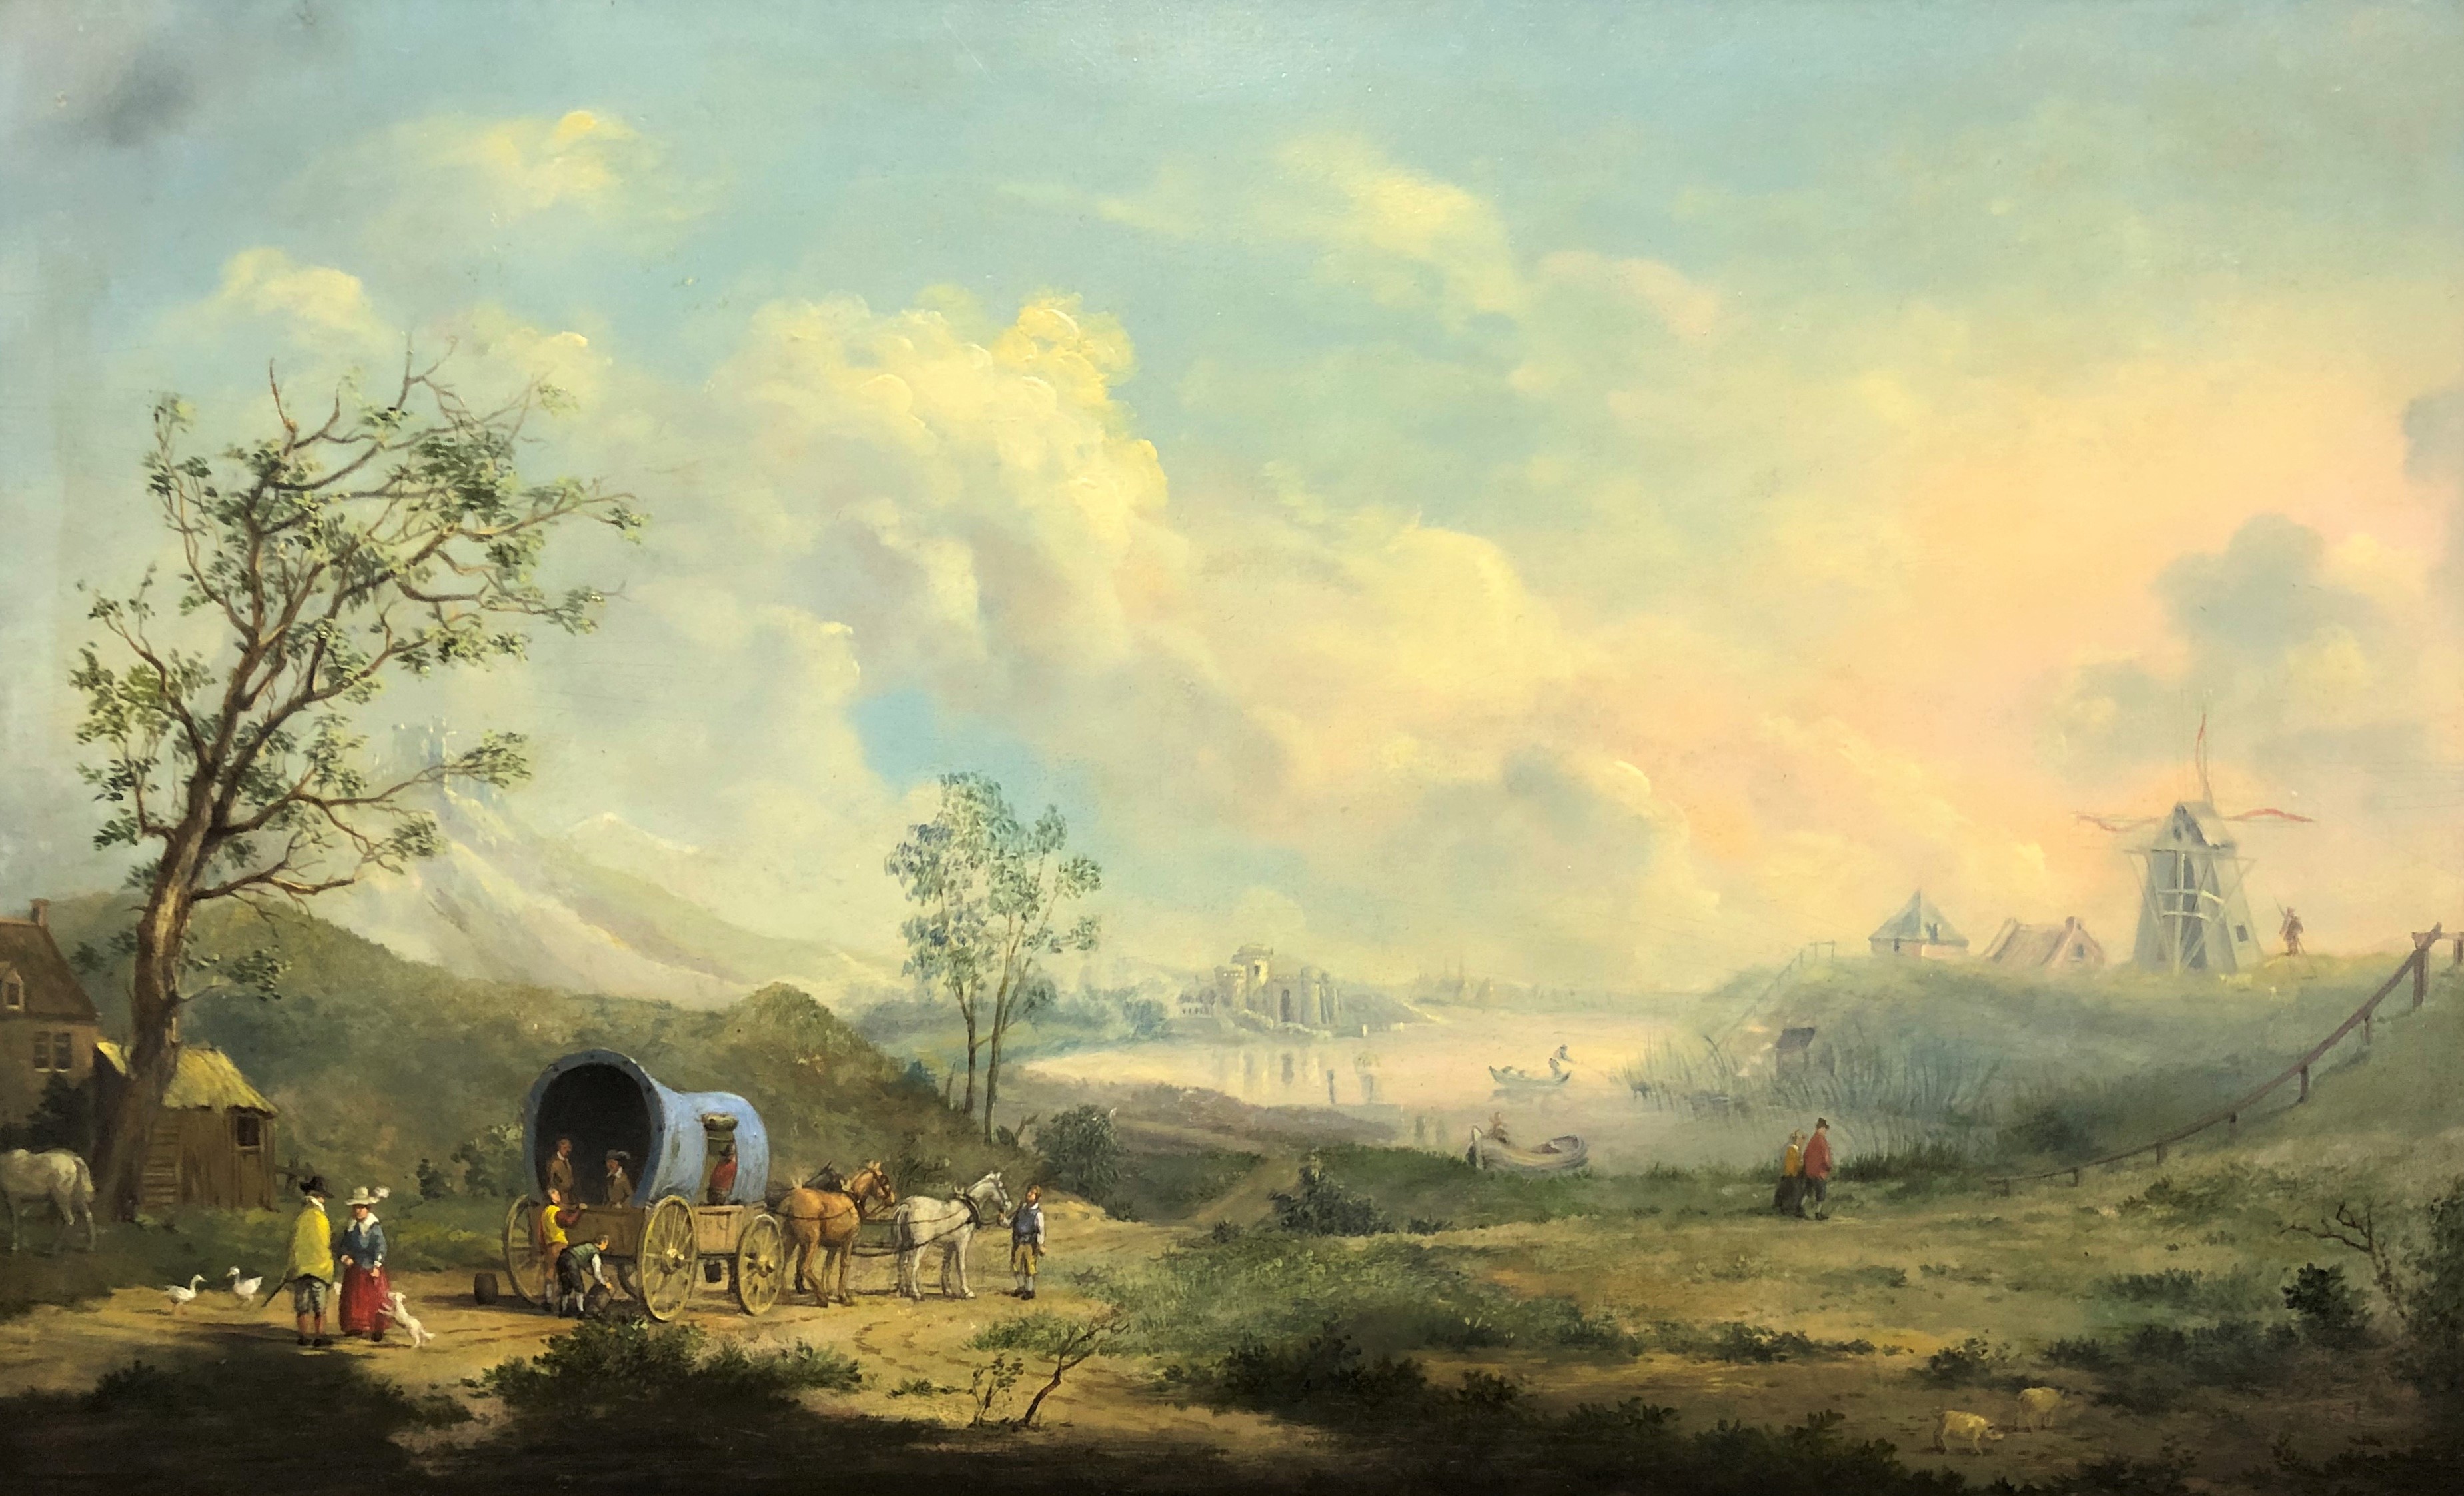 19th century Dutch School River Scene With Horse and Cart, Figures and a Windmill In The Distance - Image 2 of 2